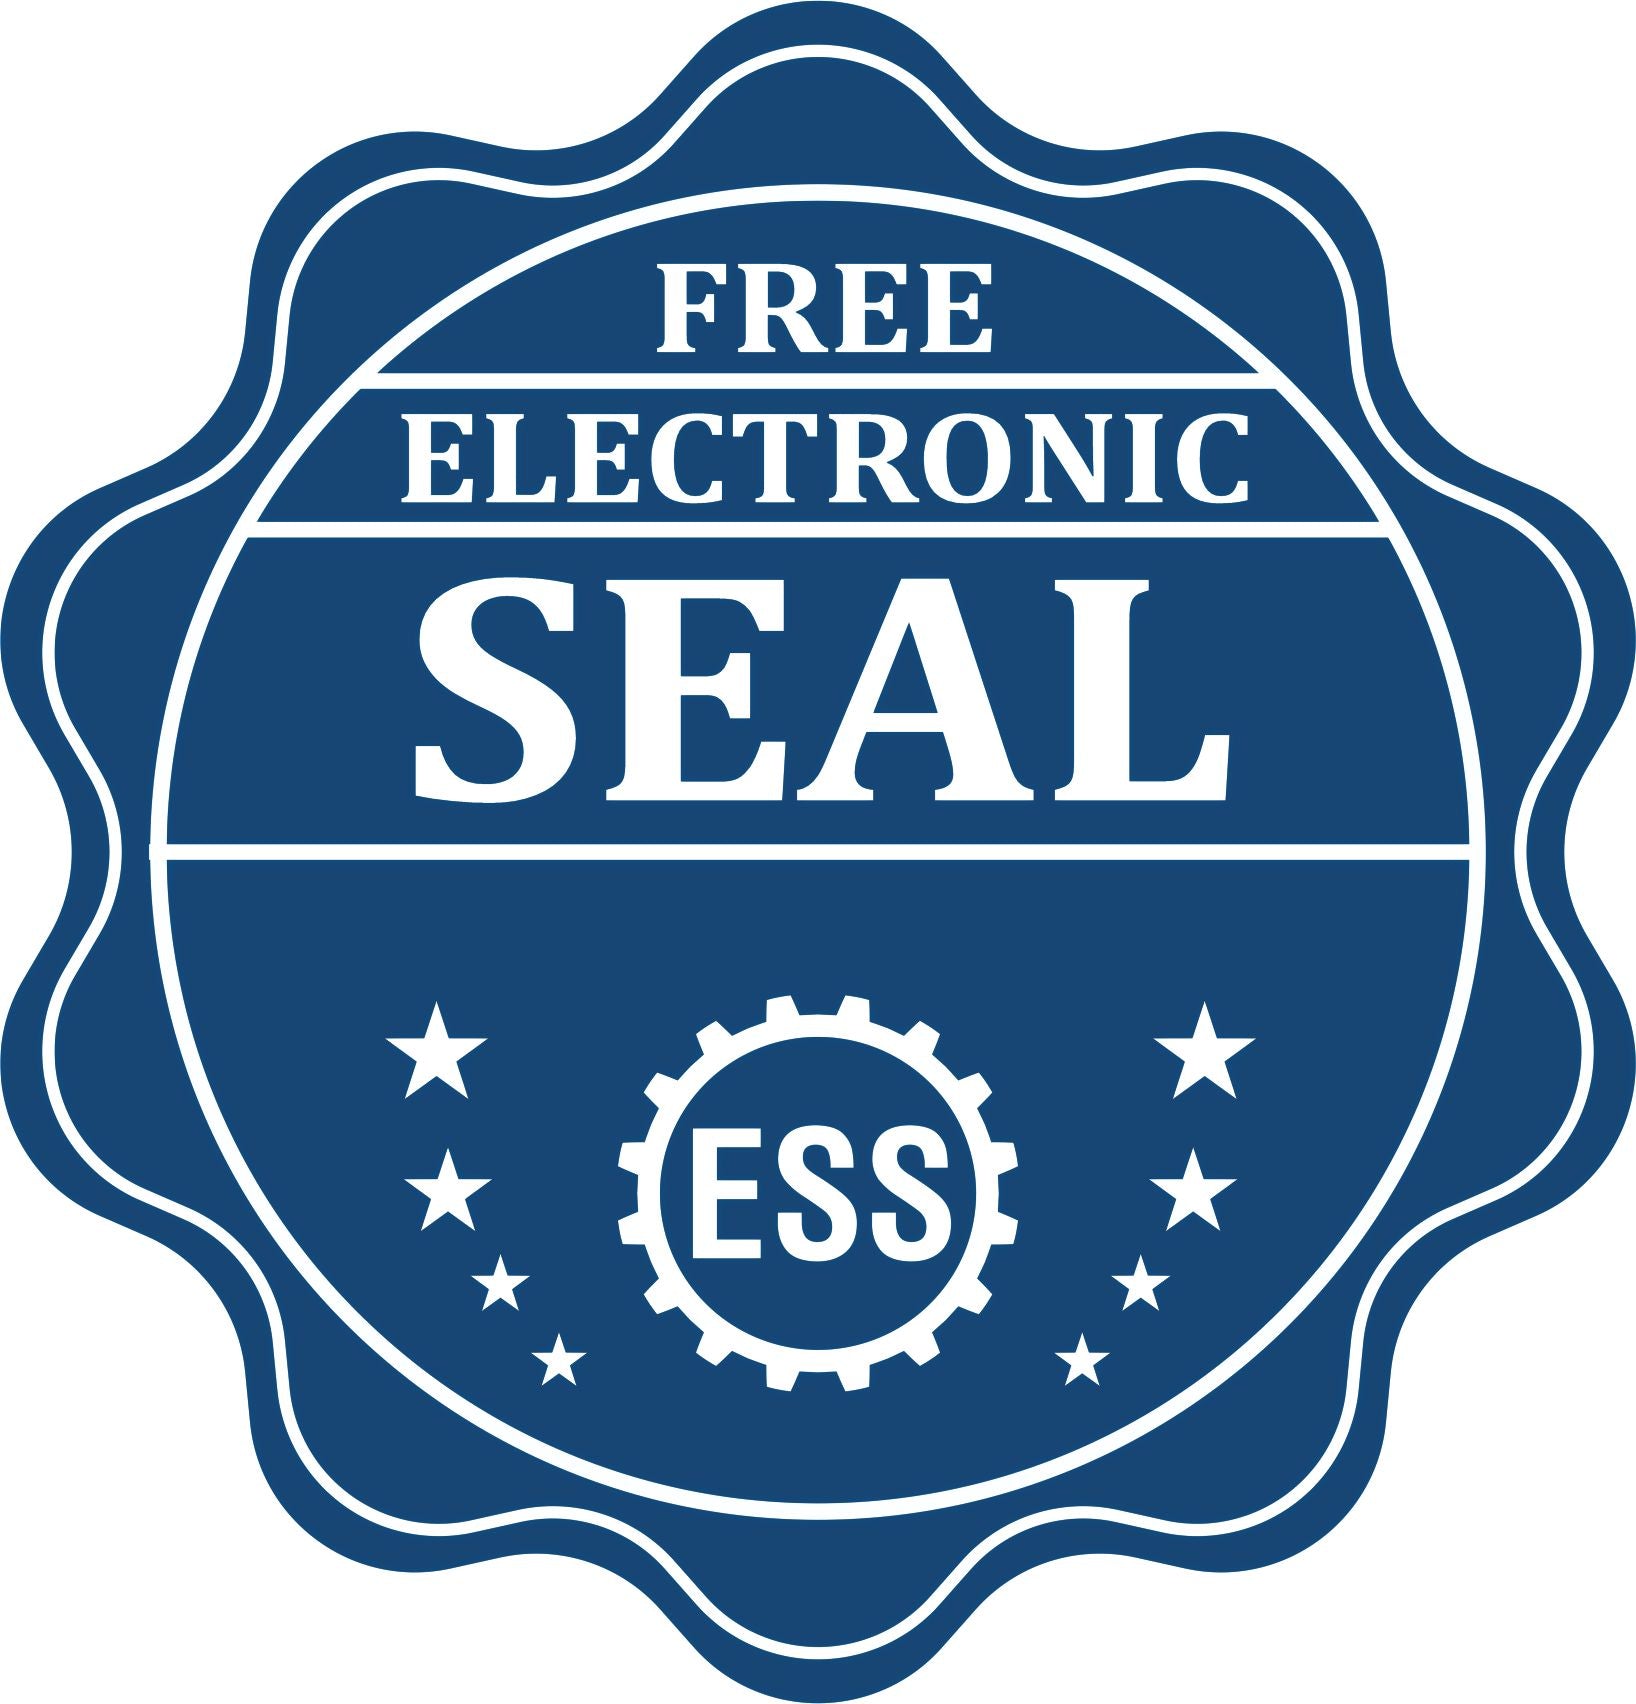 A badge showing a free electronic seal for the Louisiana Professional Engineer Seal Stamp with stars and the ESS gear on the emblem.